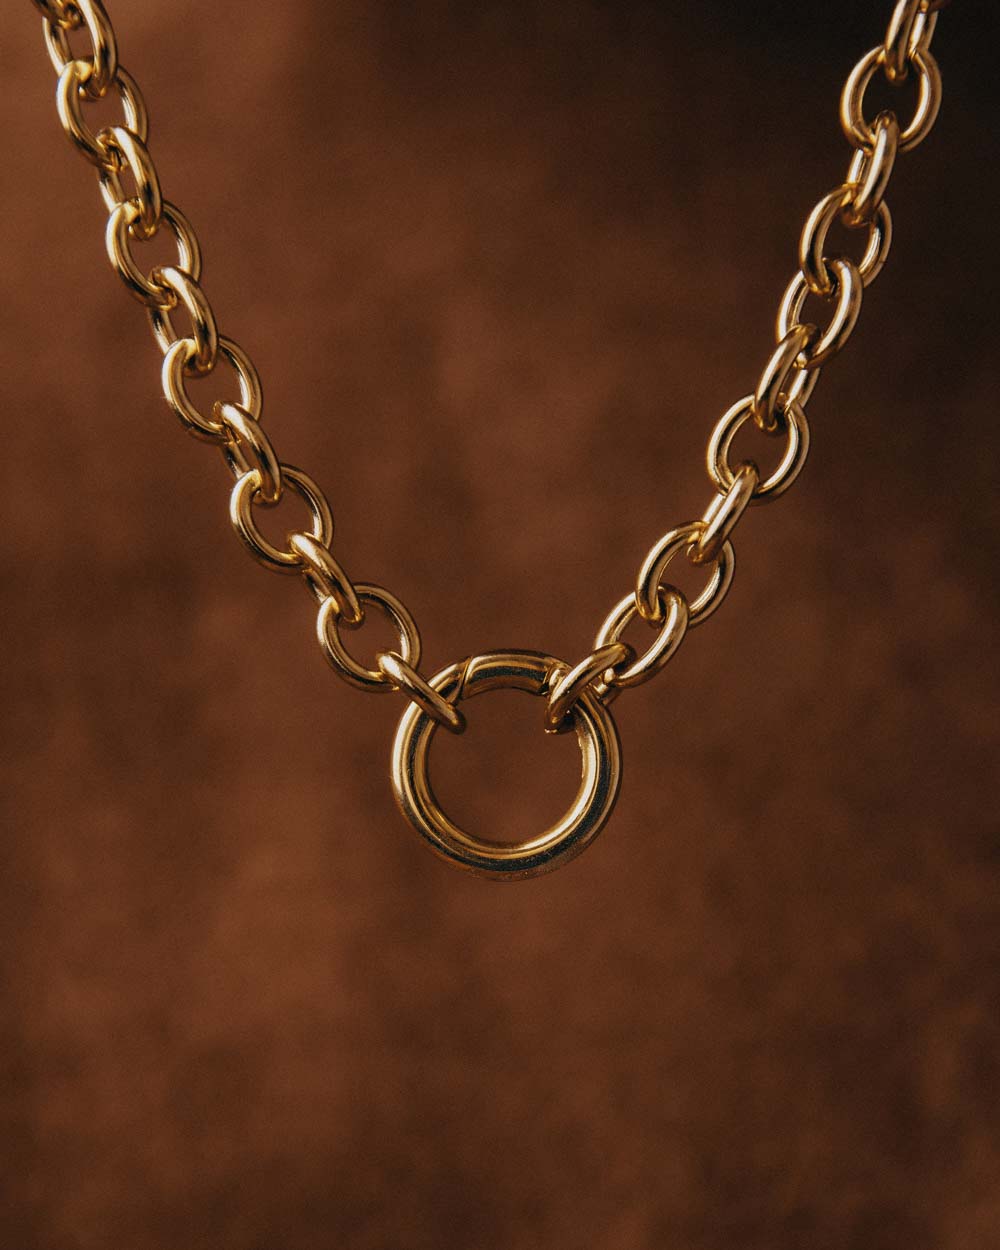 Ring Necklace in Golden Stainless Steel - Online Unissex Jewelry - Dicci